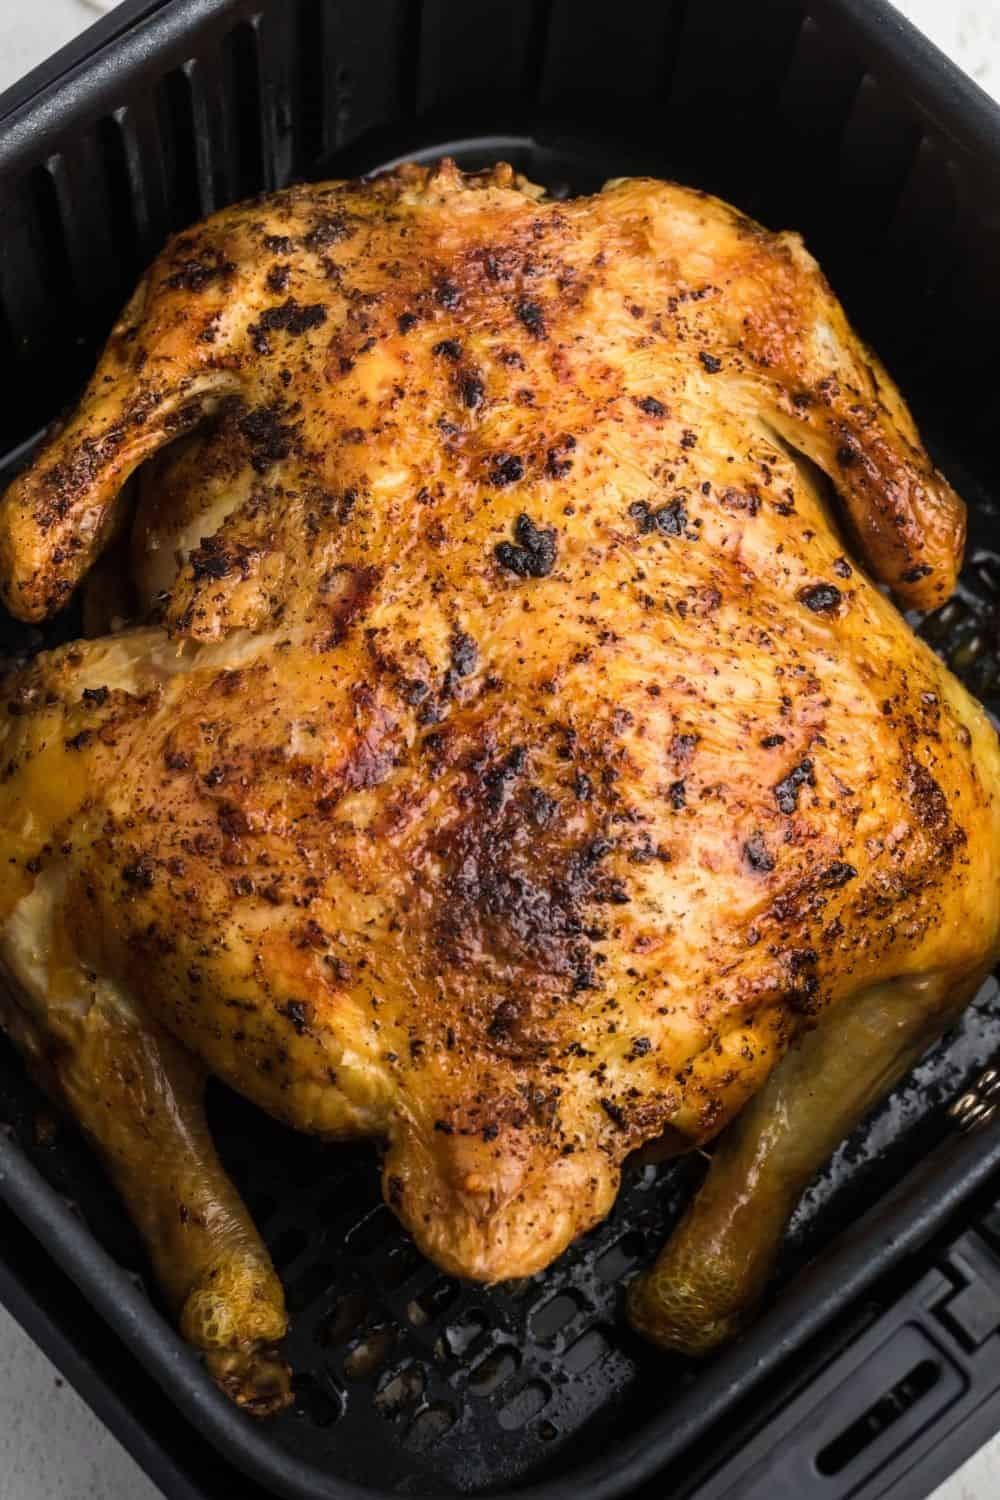 https://www.everydayfamilycooking.com/wp-content/uploads/2021/03/air-fryer-whole-chicken3.jpg